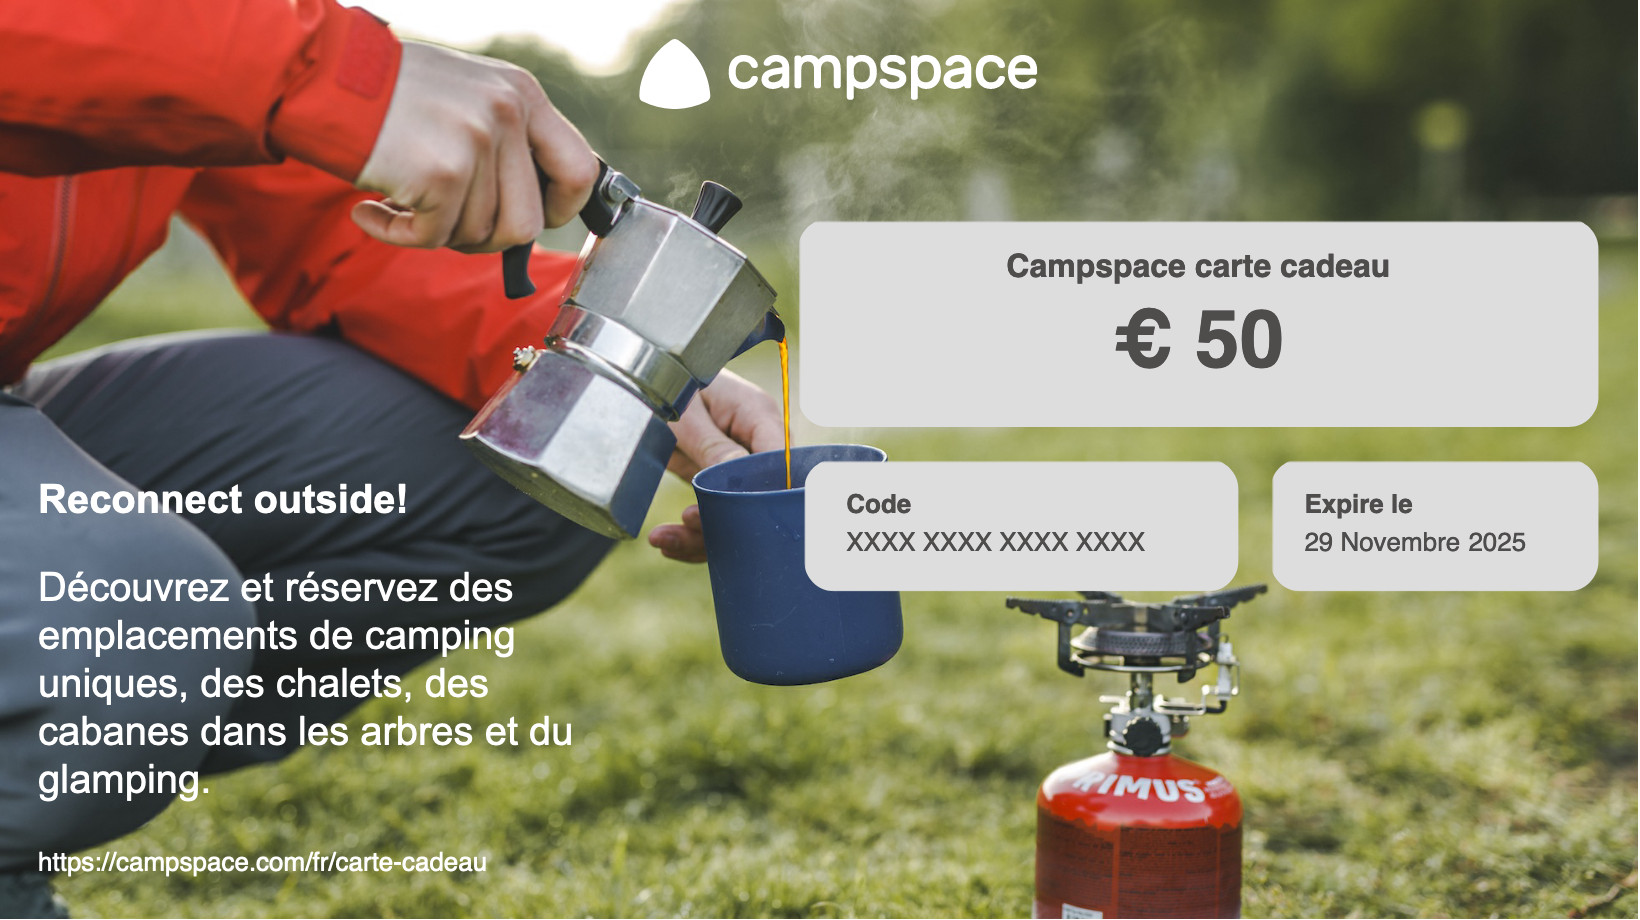 Glampspace